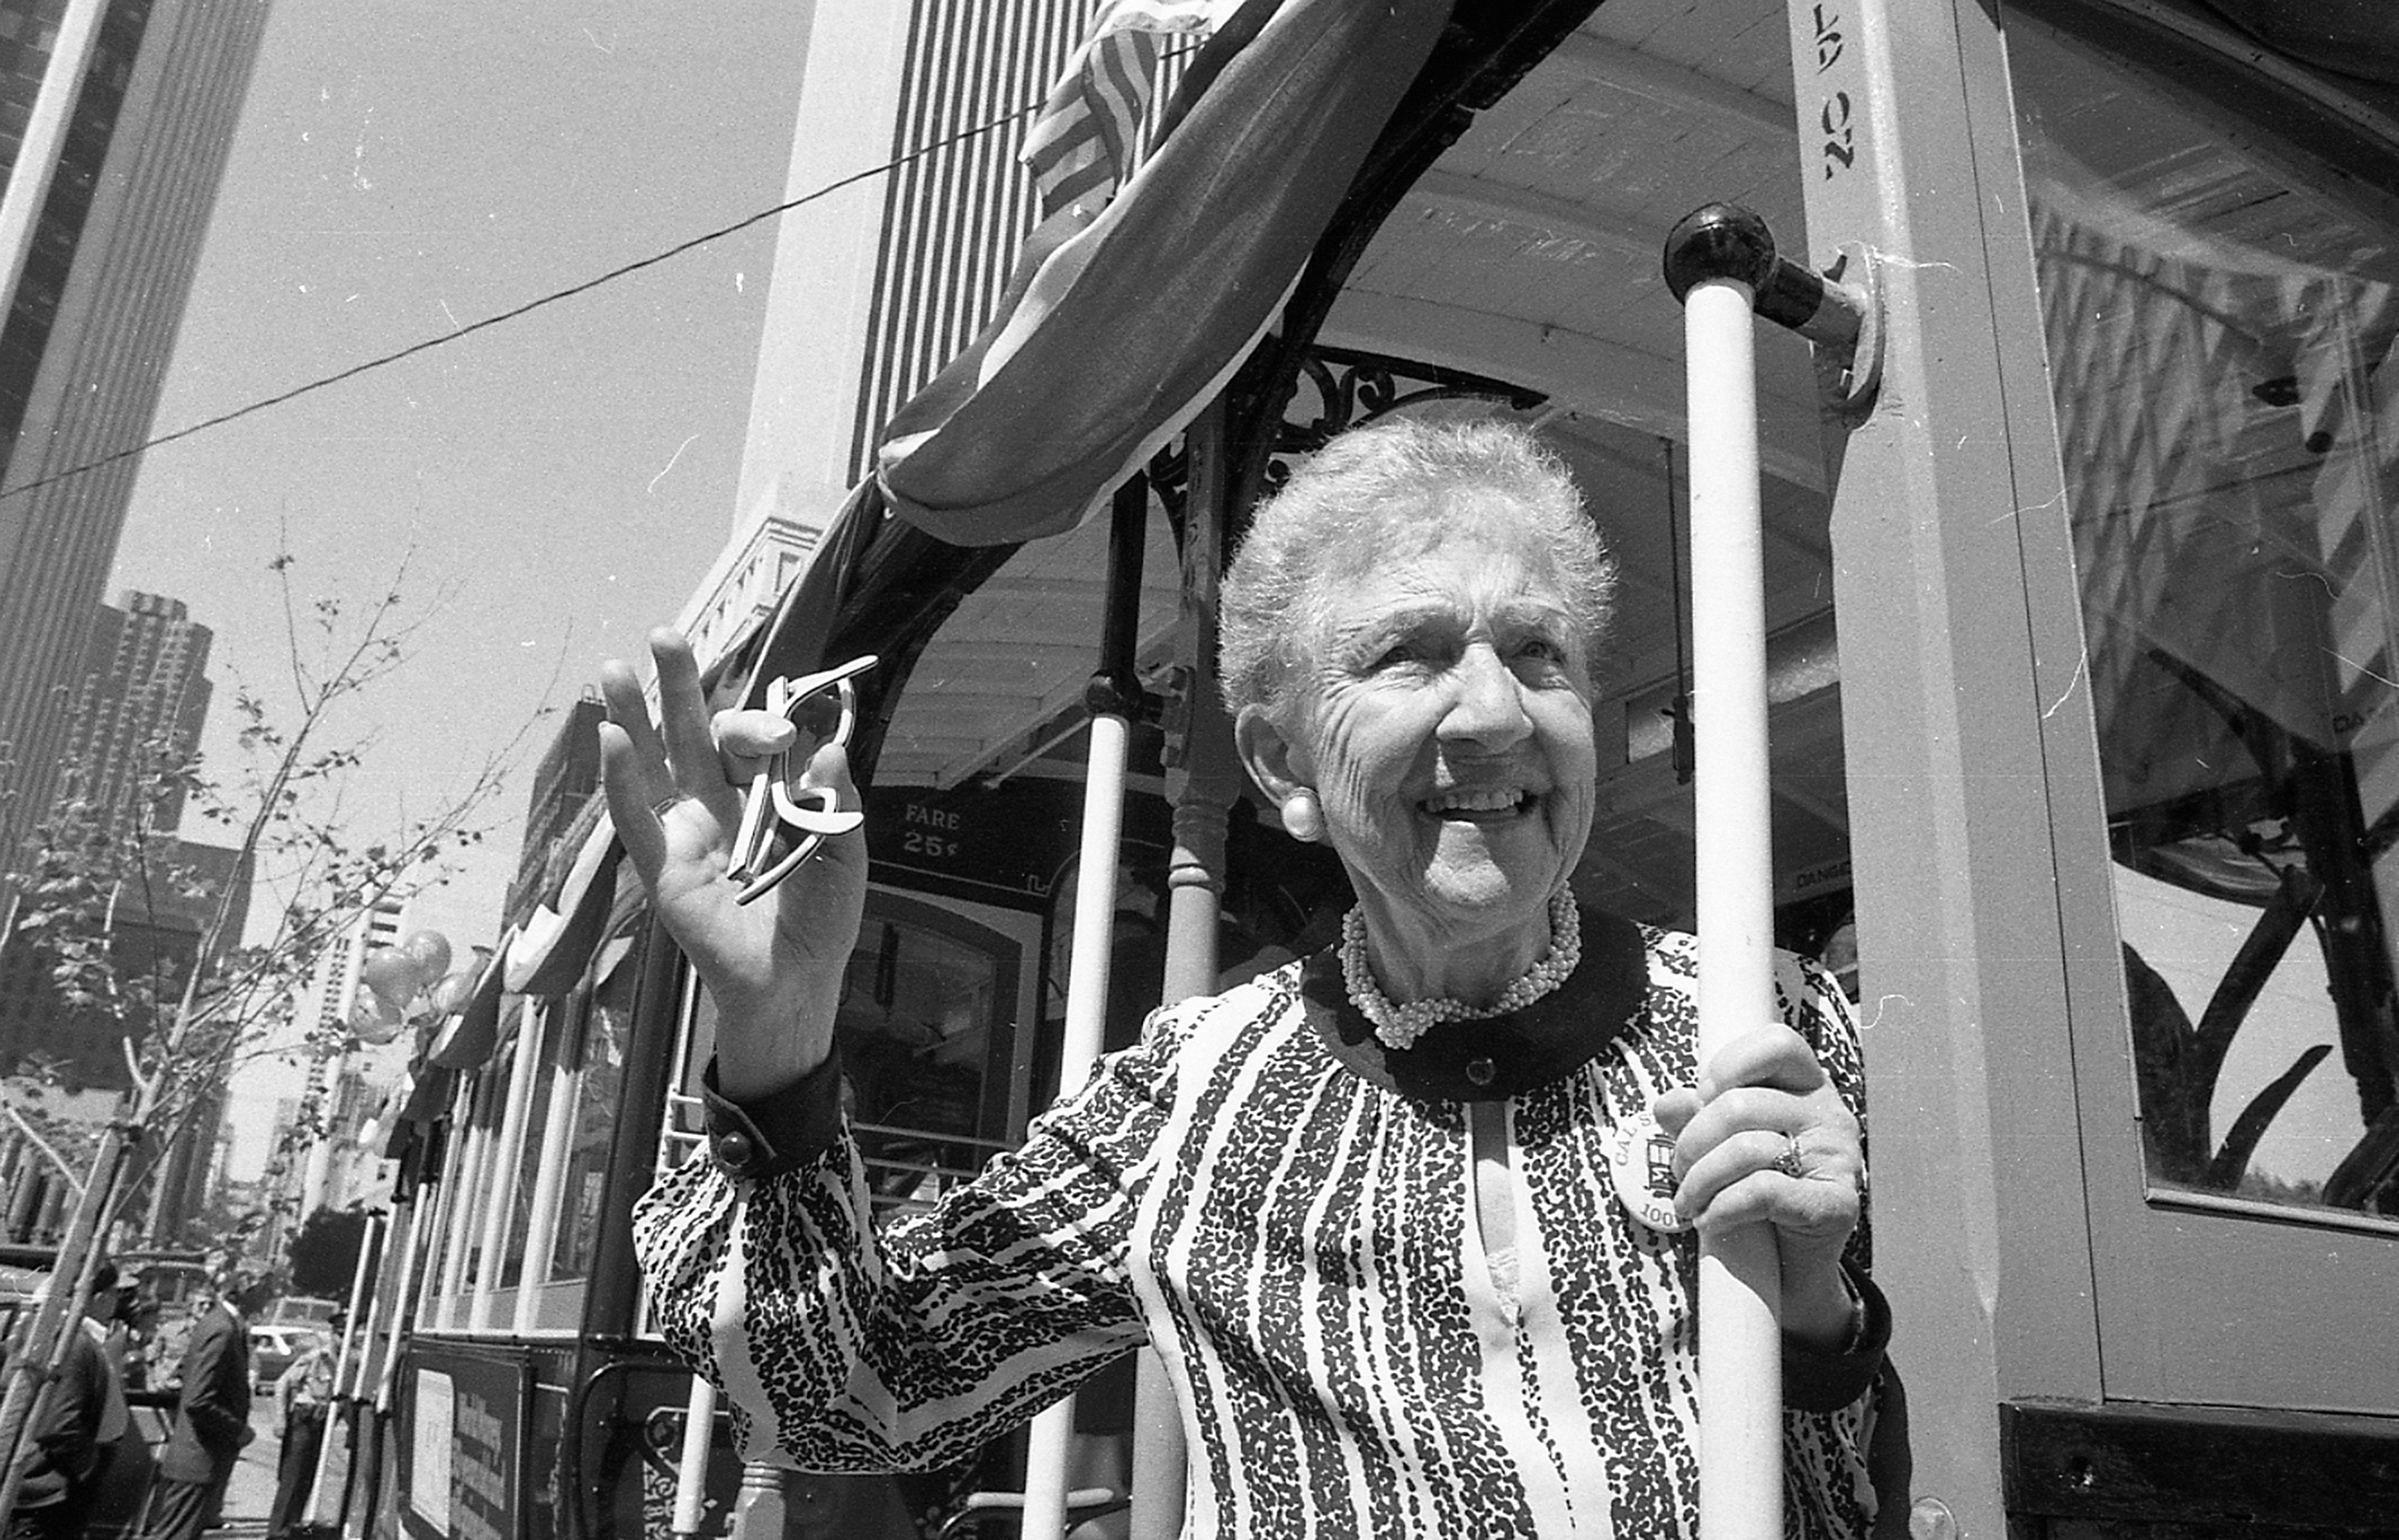 An older woman holding keys in her hand holds onto the running board of a San Francisco cable car.